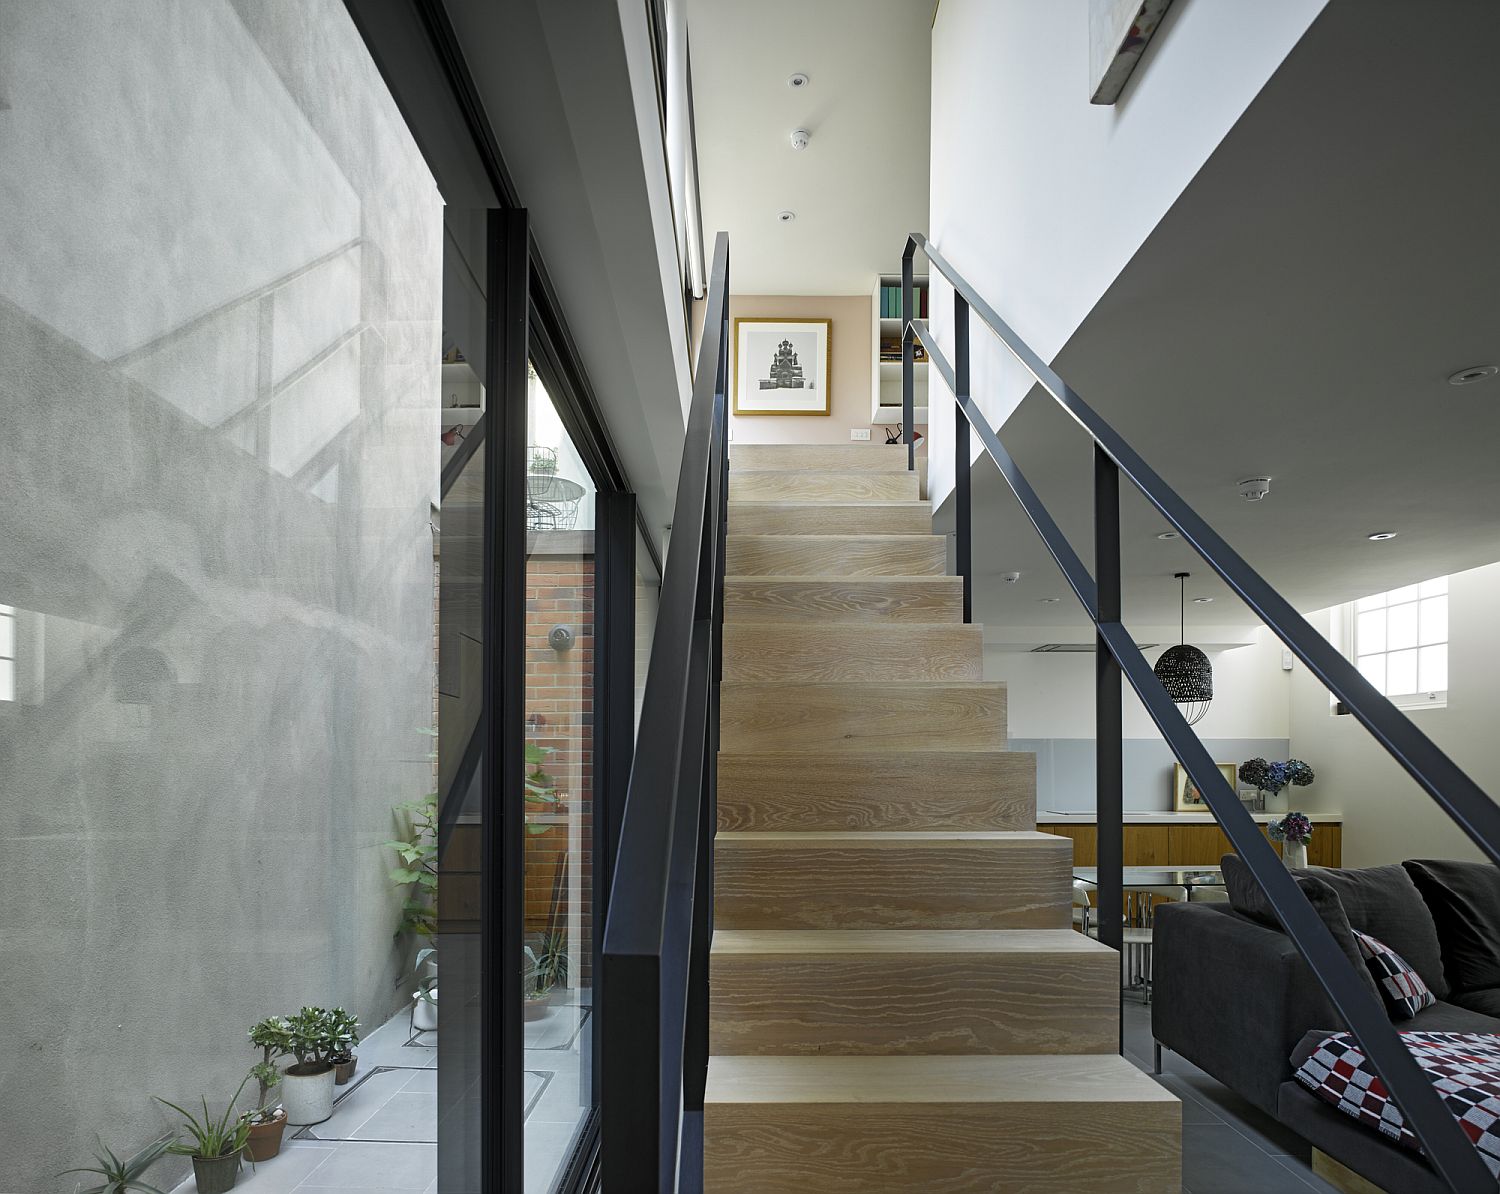 Staircase-to-the-mezzanine-level-in-wood-and-steel